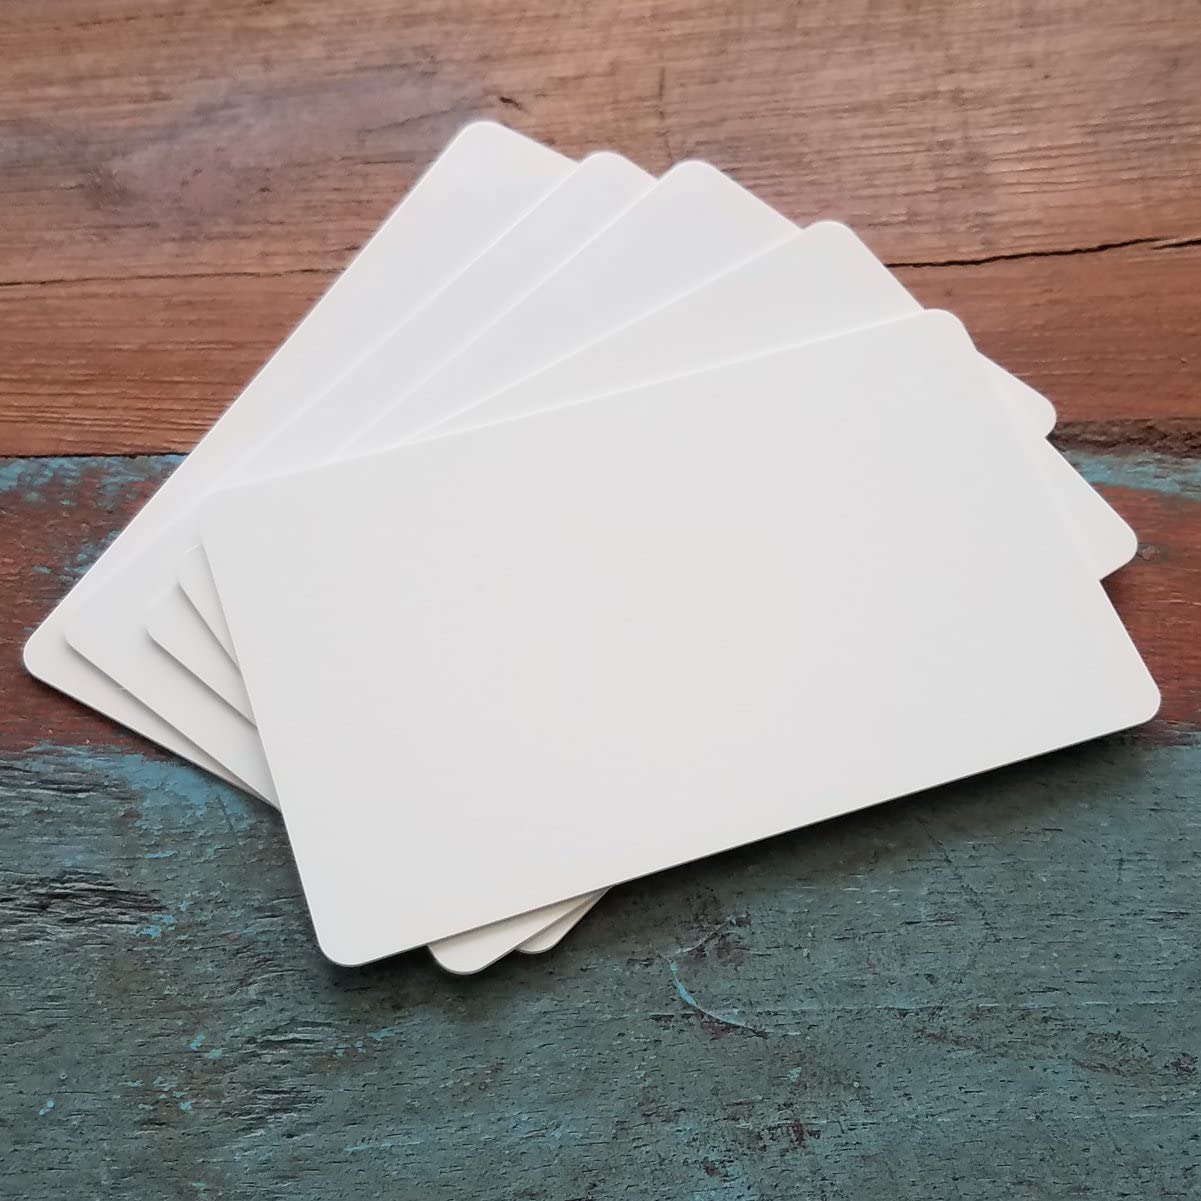 A stack of Premium Blank PVC Cards for ID Badge Printers - Graphic Quality CR80 30 Mil (CR80), blank and white, fanned out on a wooden surface with a weathered texture.